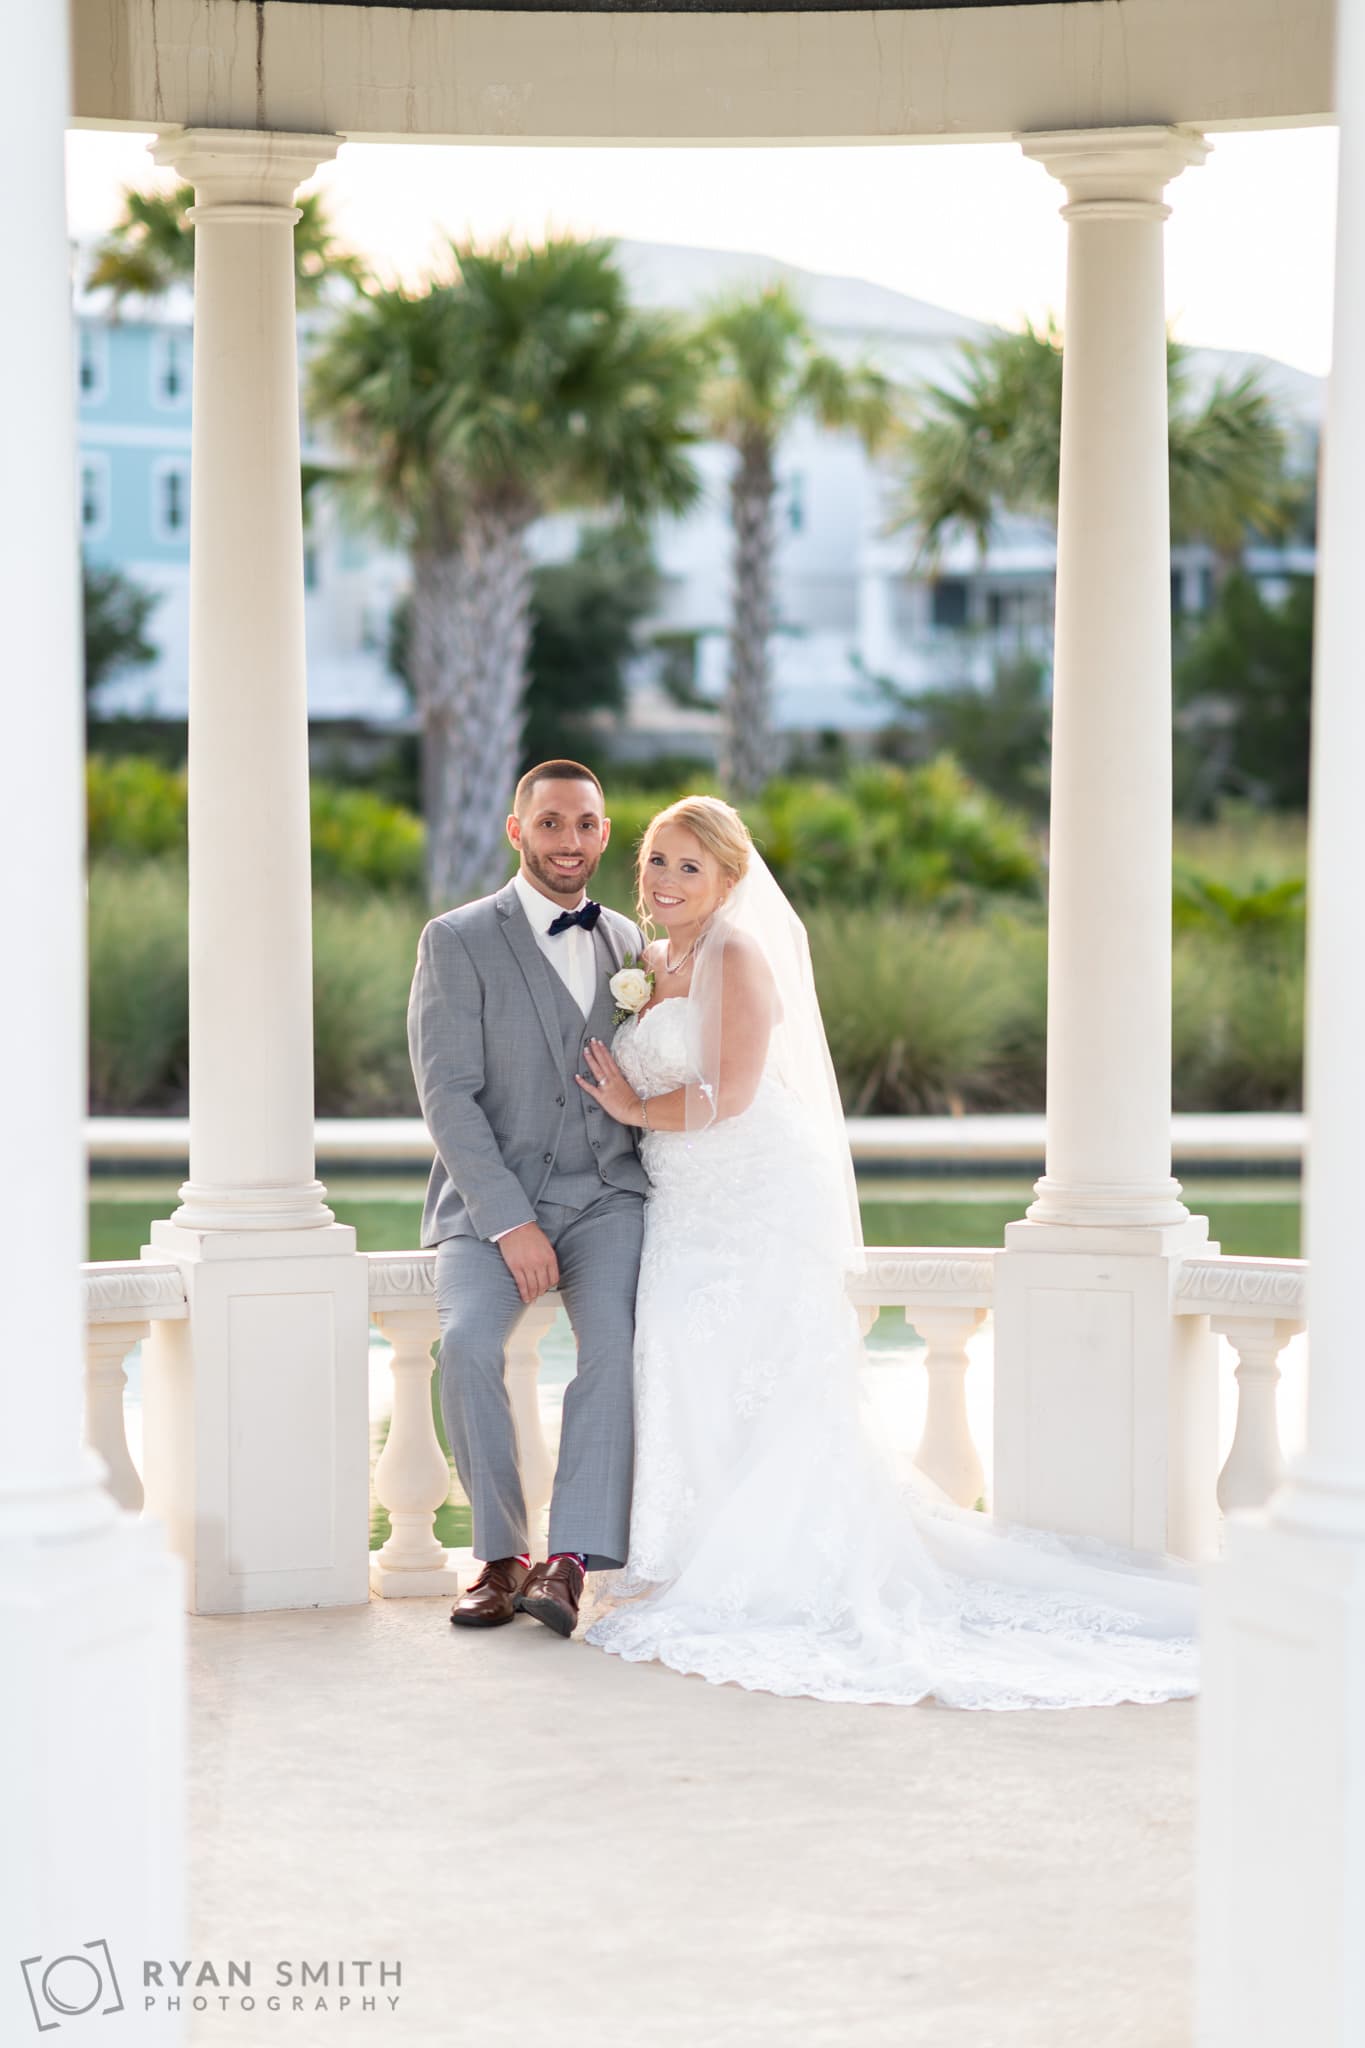 Bride and groom portraits in the gazebo   - 21 Main Events - North Myrtle Beach